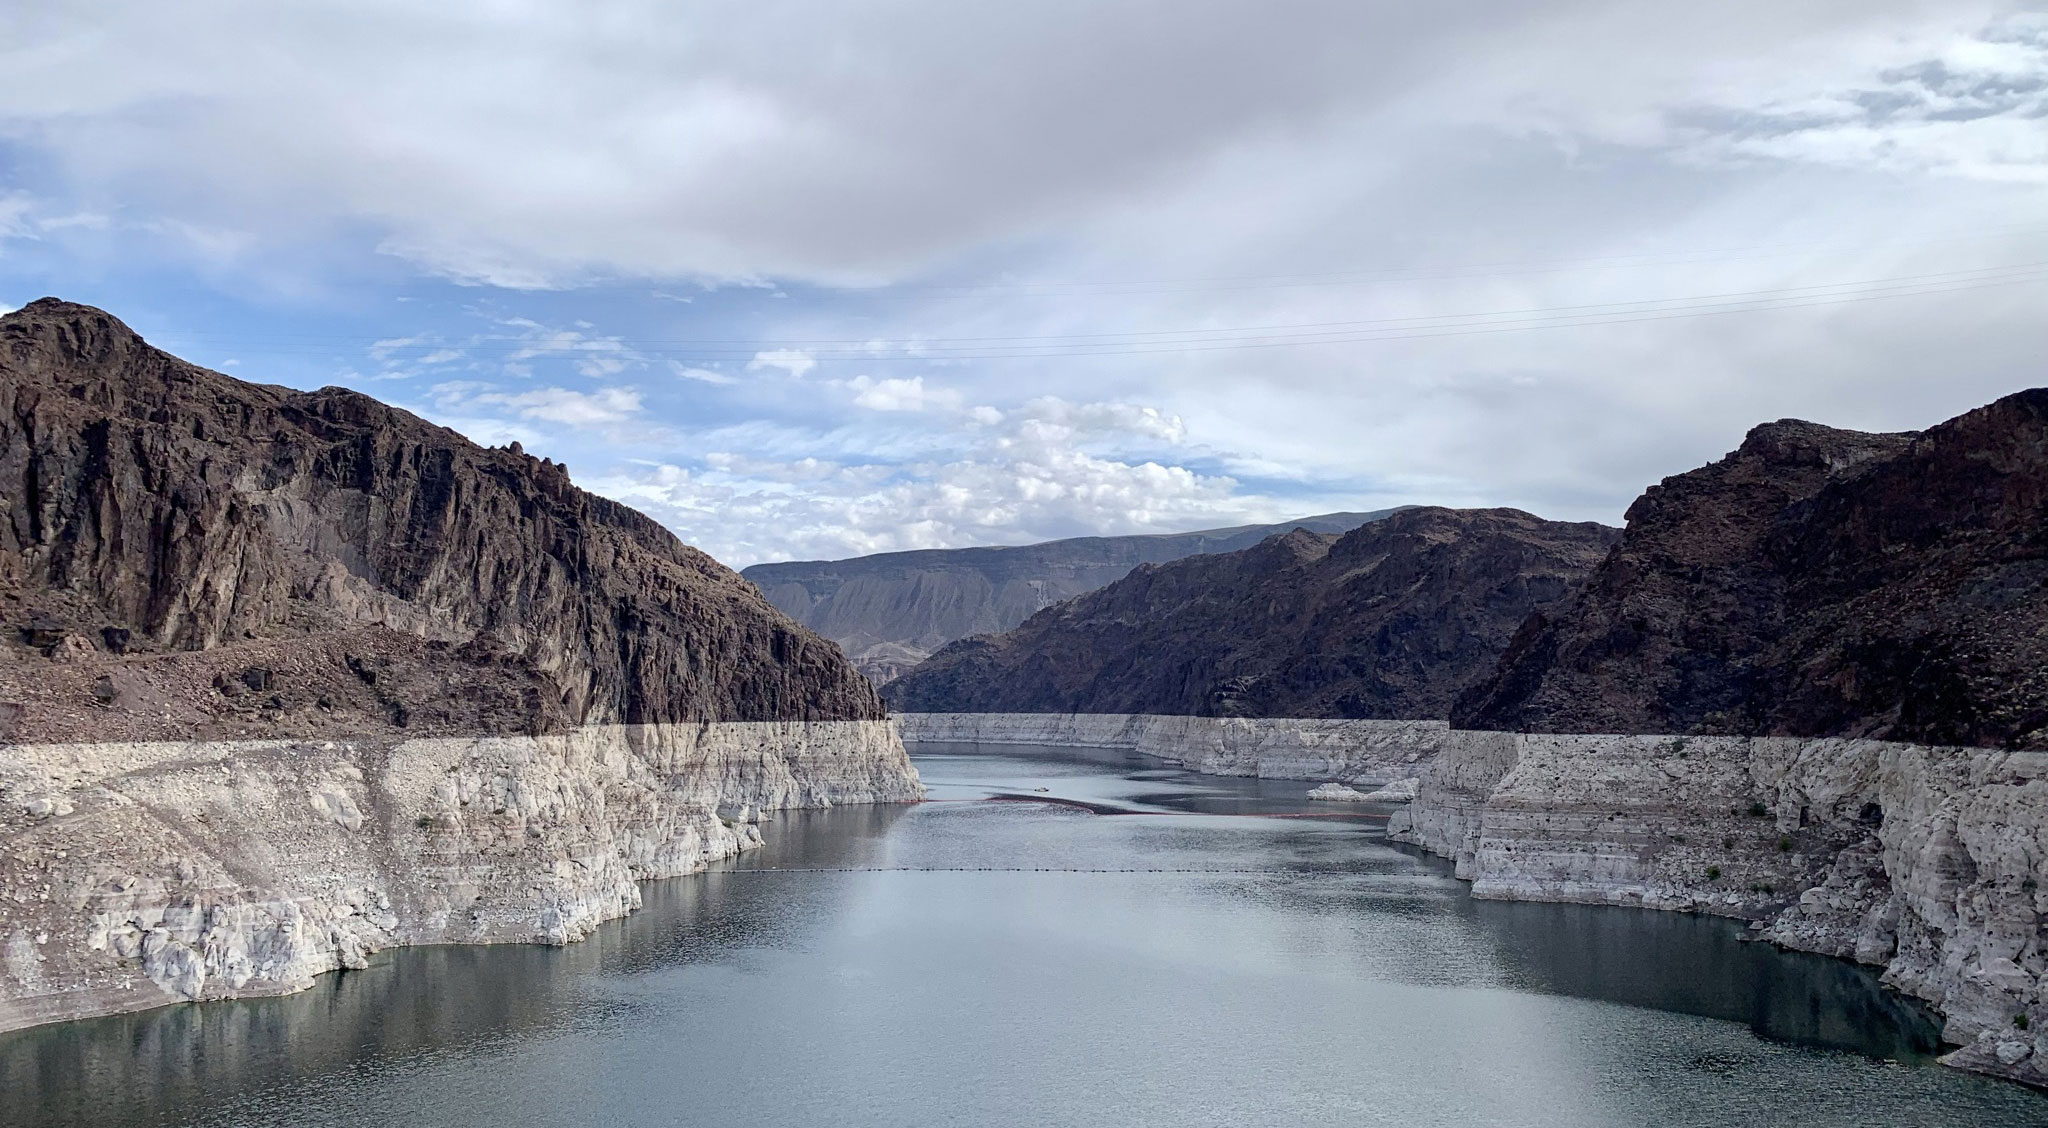 Photograph of Lake Mean behind the Hoover Dam, Arizona-Nevada border. The photo shows a narrow lake between hills on either side. The rocks making up the hills are dark brown above and off-white near the surface of the lake.